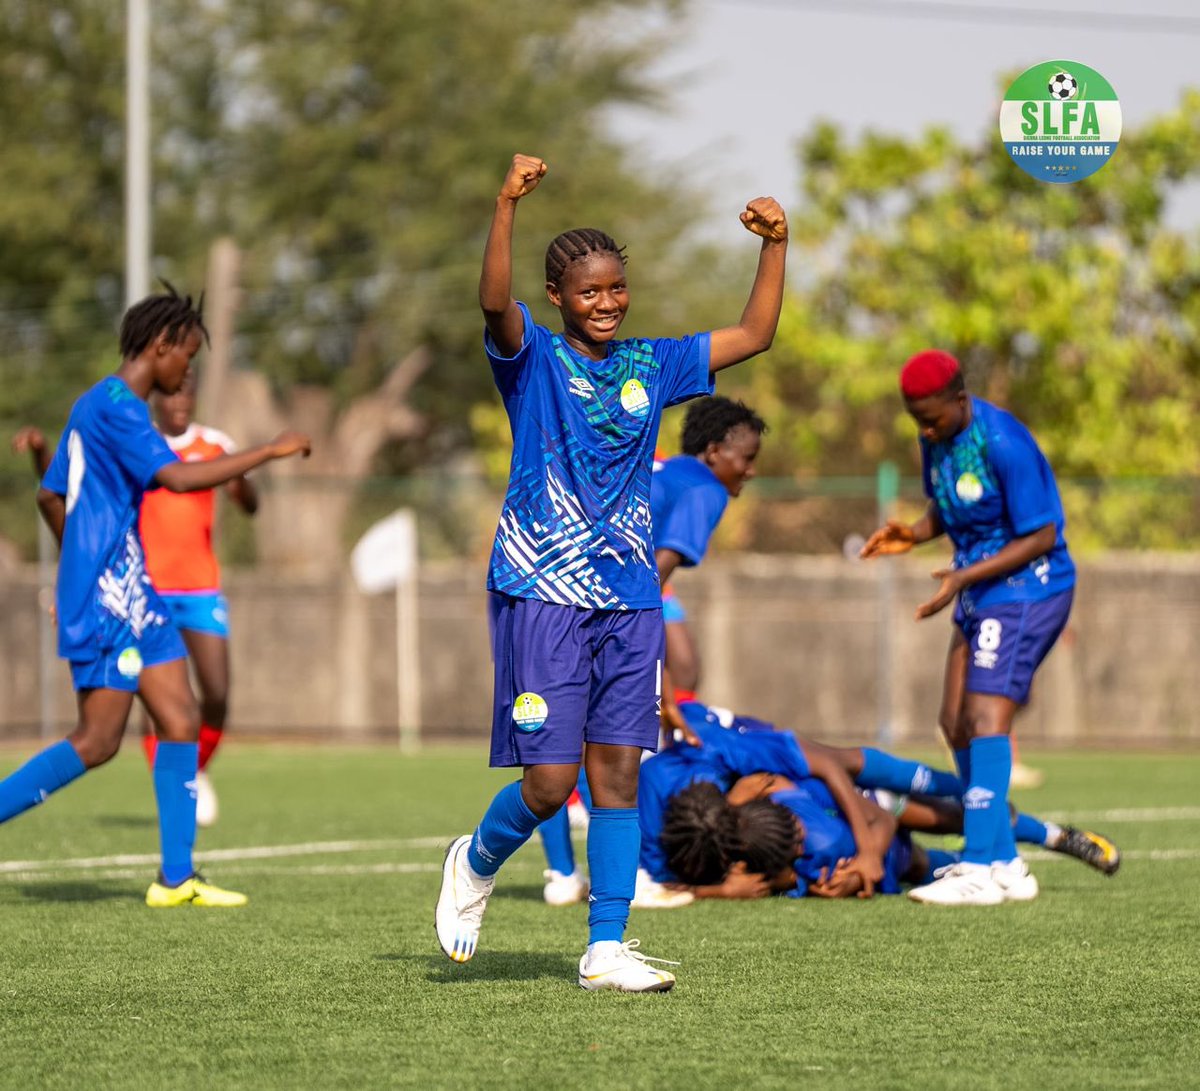 Exciting action shots from the Women’s Day Cup opening match between Sierra Leone (U-17) and Liberia (U-17)! Sierra Leone emerged victorious with a 2-1 win. Congratulations to the team! #WomensDayCup #SierraLeone #Liberia #WomenInSports